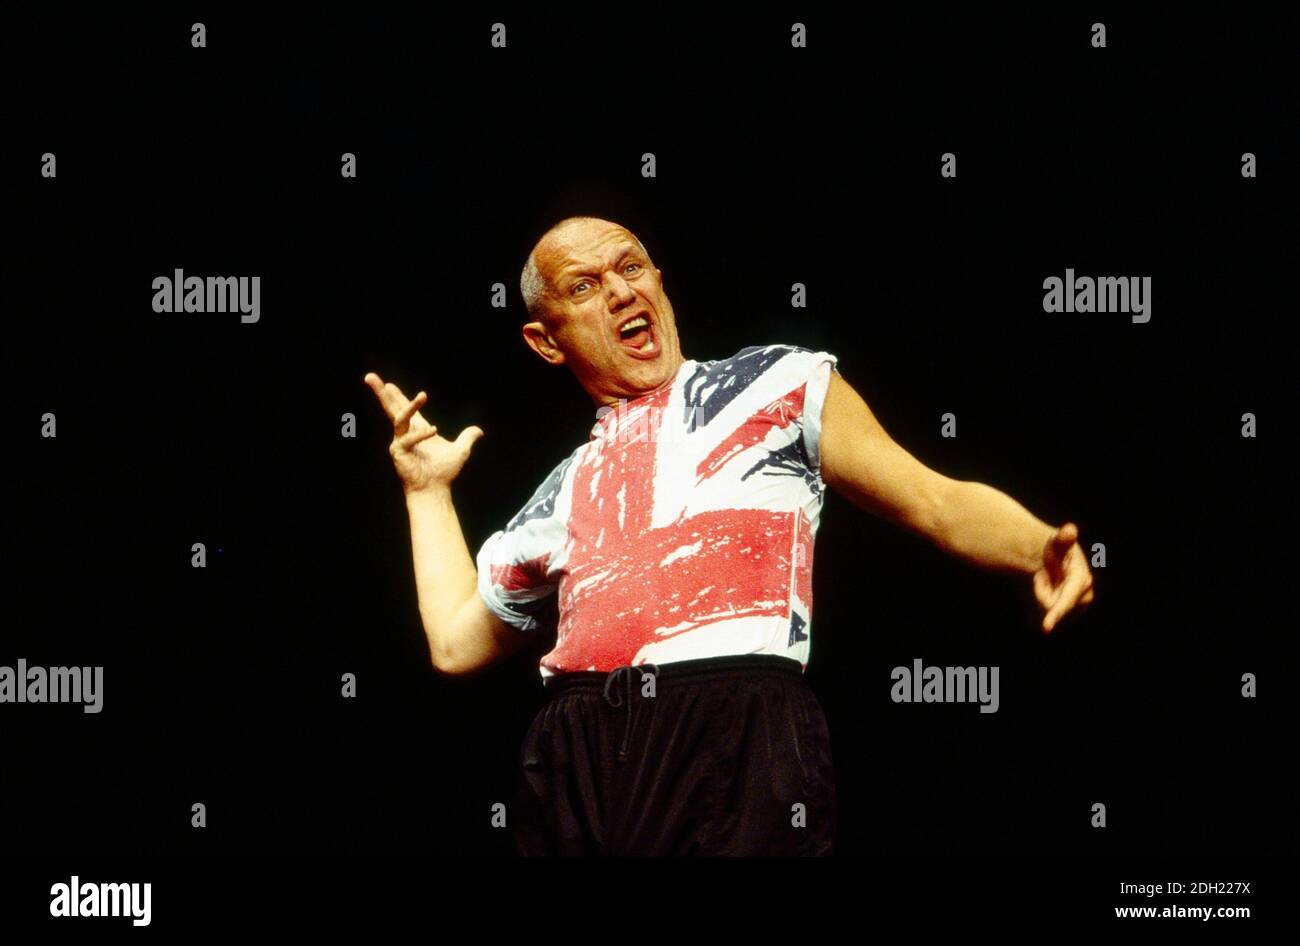 Steven Berkoff in DOG   part of the ONE MAN trilogy of plays written, directed and performed by Steven Berkoff Garrick Theatre, London WC2  15/11/1993 Stock Photo